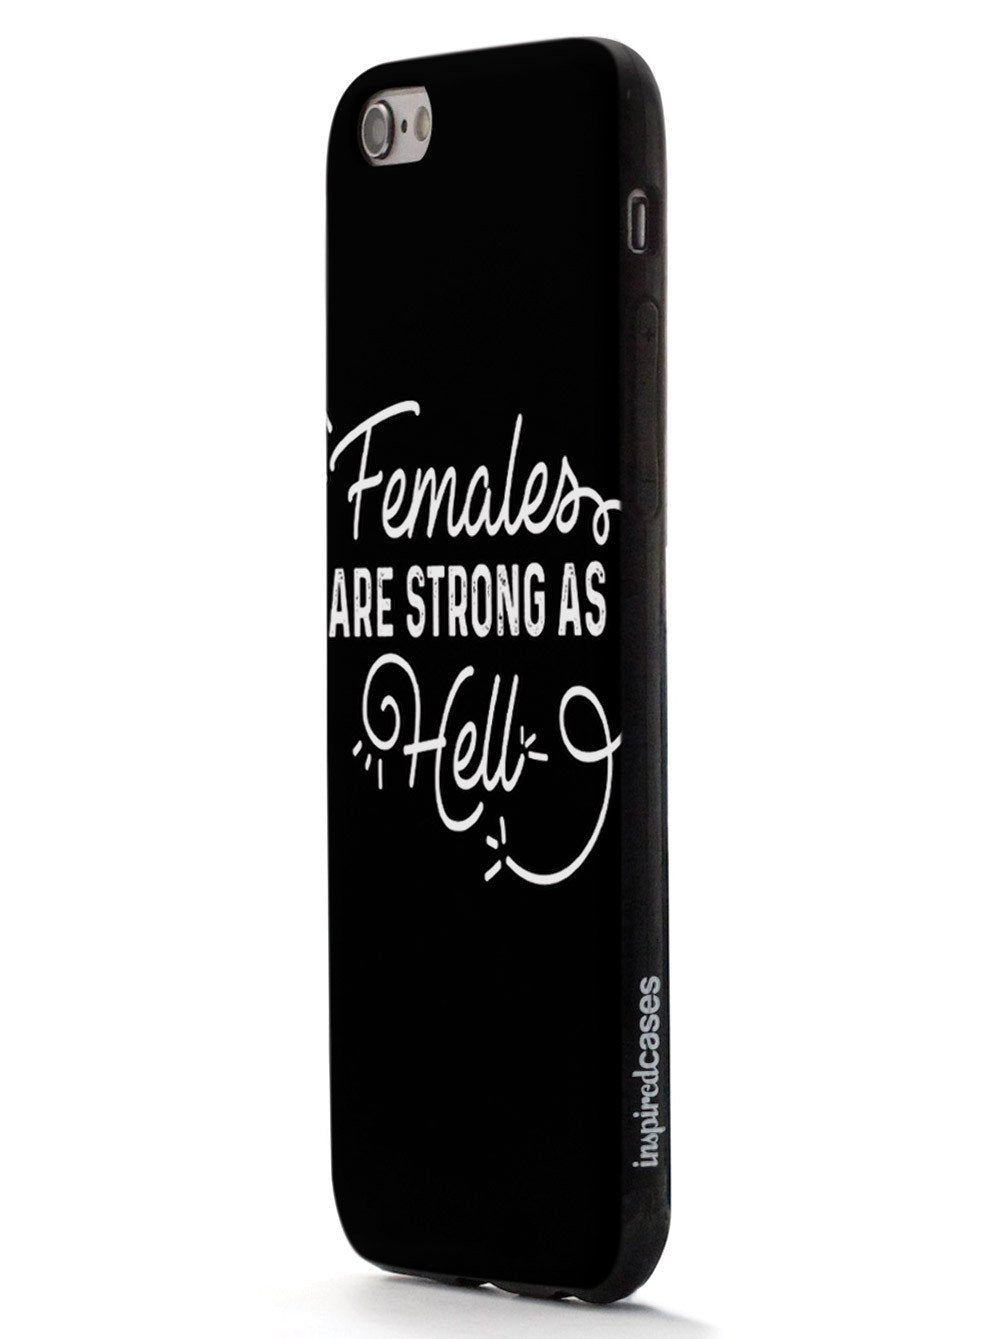 Females Are Strong As Hell - Black Case - pipercleo.com